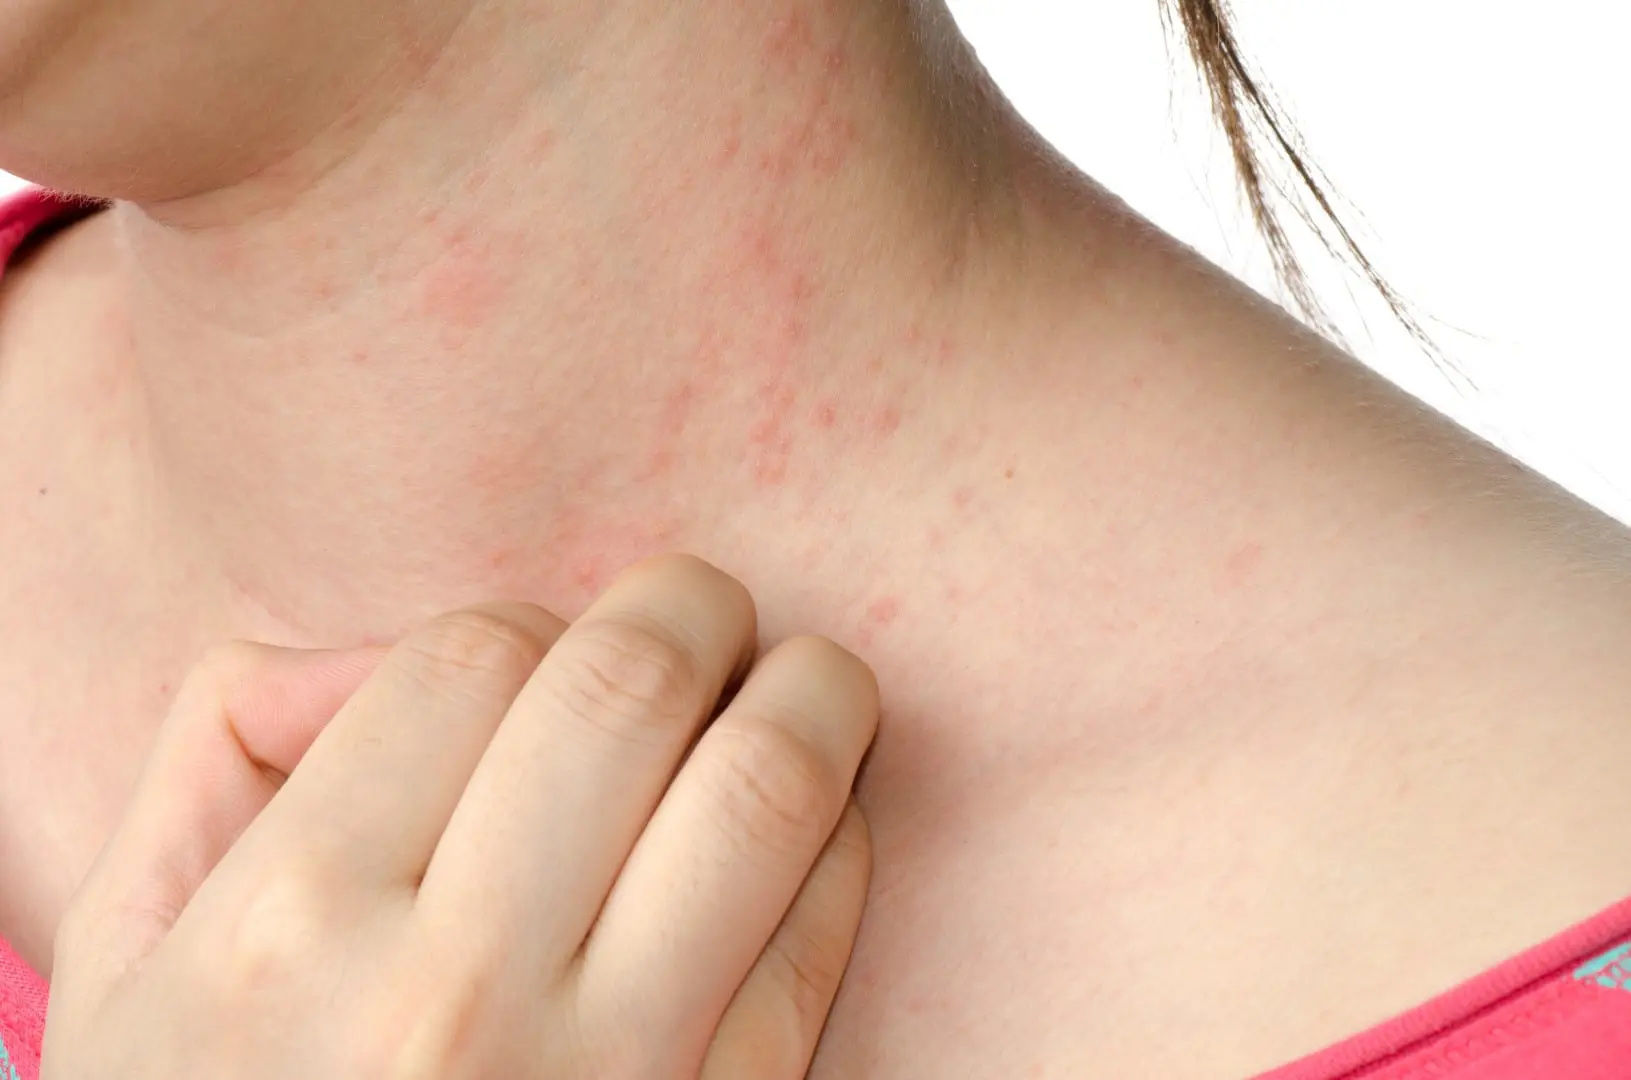 What are the Symptoms of Eczema and the Treatment for Eczema?